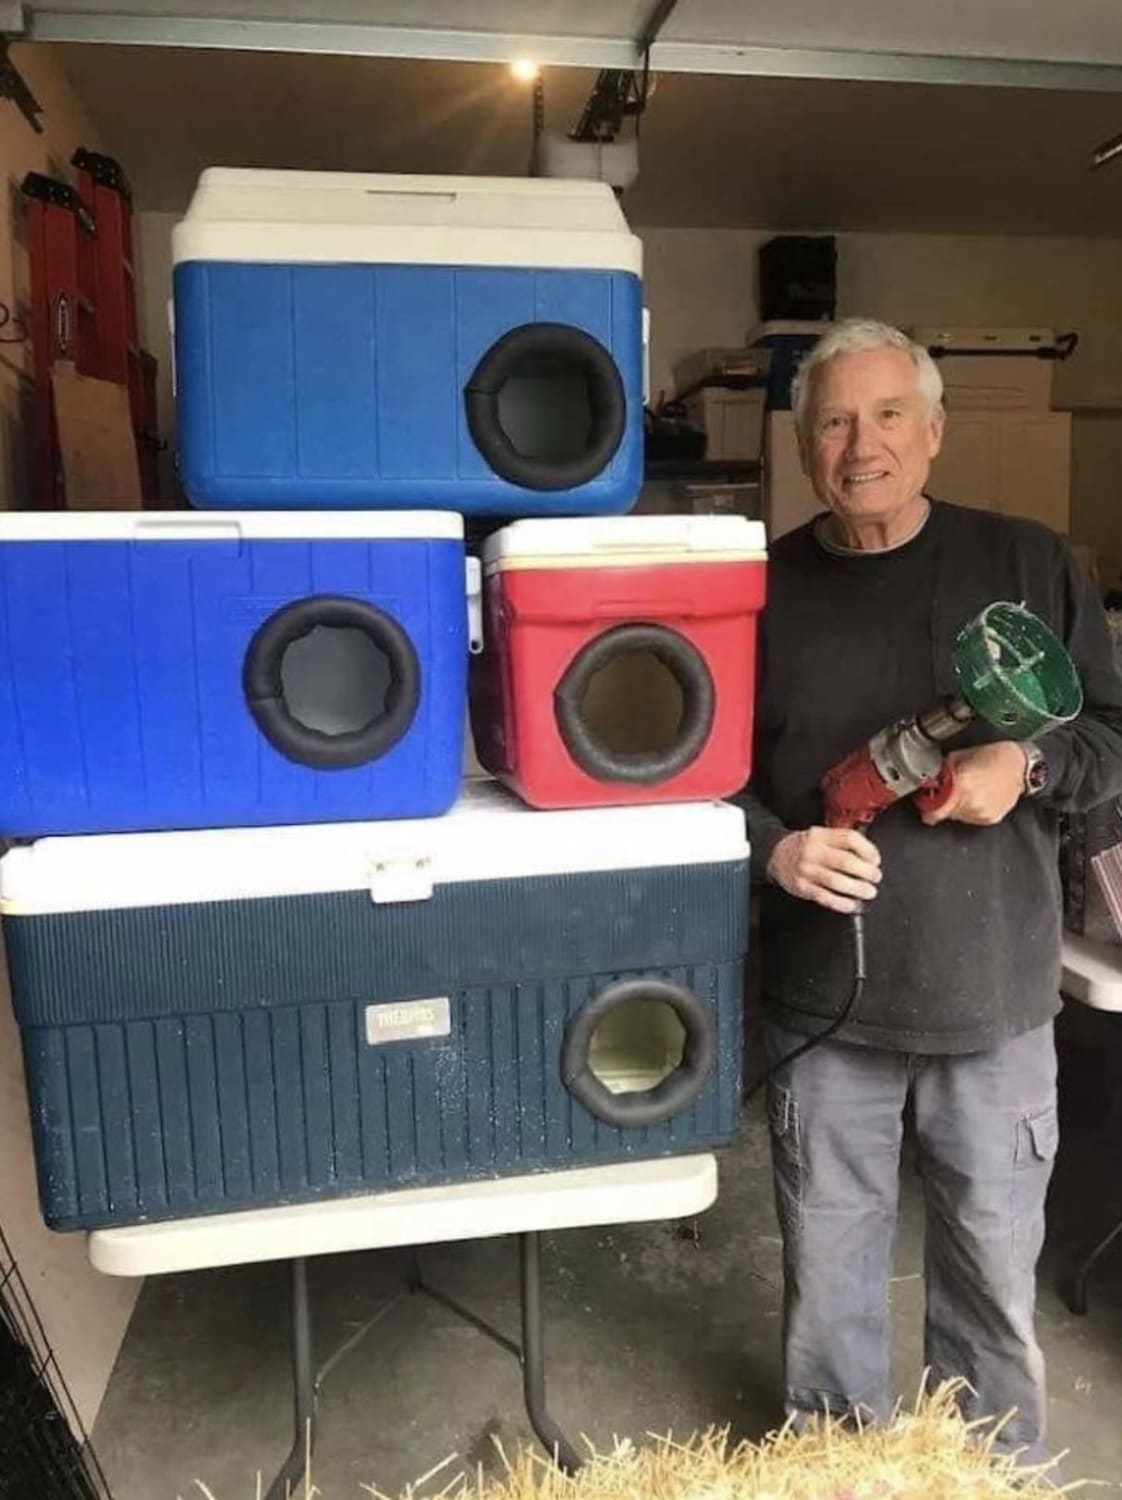 This Man Is Recycling Old Picnic Coolers And Making Them Into Shelters For Stray Cats During Winter. How Cool Is This?